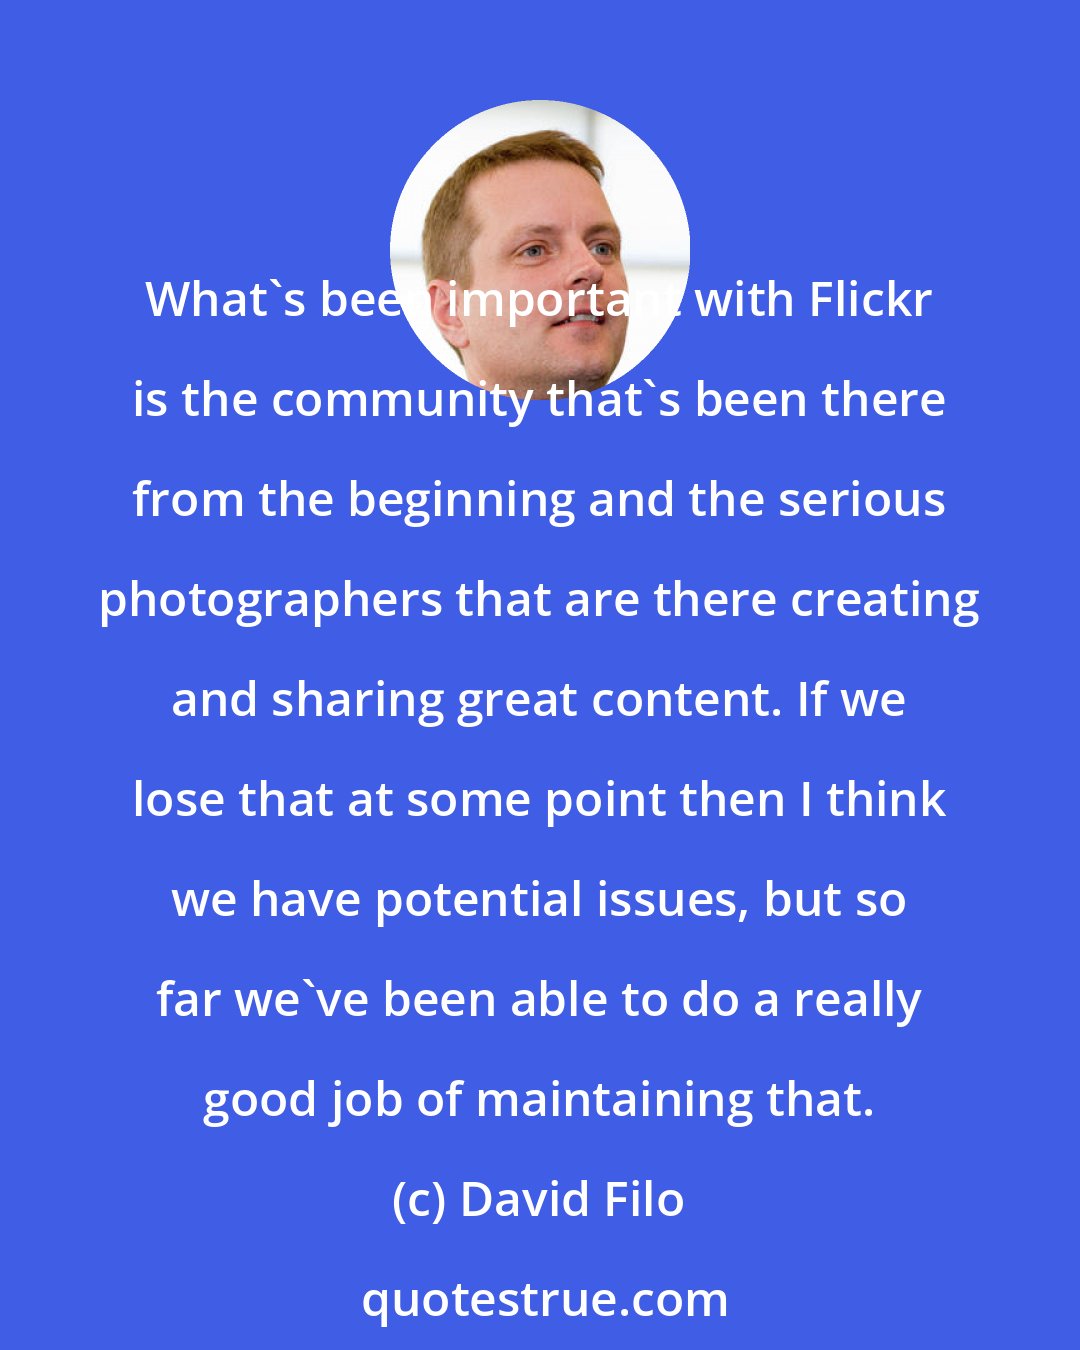 David Filo: What's been important with Flickr is the community that's been there from the beginning and the serious photographers that are there creating and sharing great content. If we lose that at some point then I think we have potential issues, but so far we've been able to do a really good job of maintaining that.